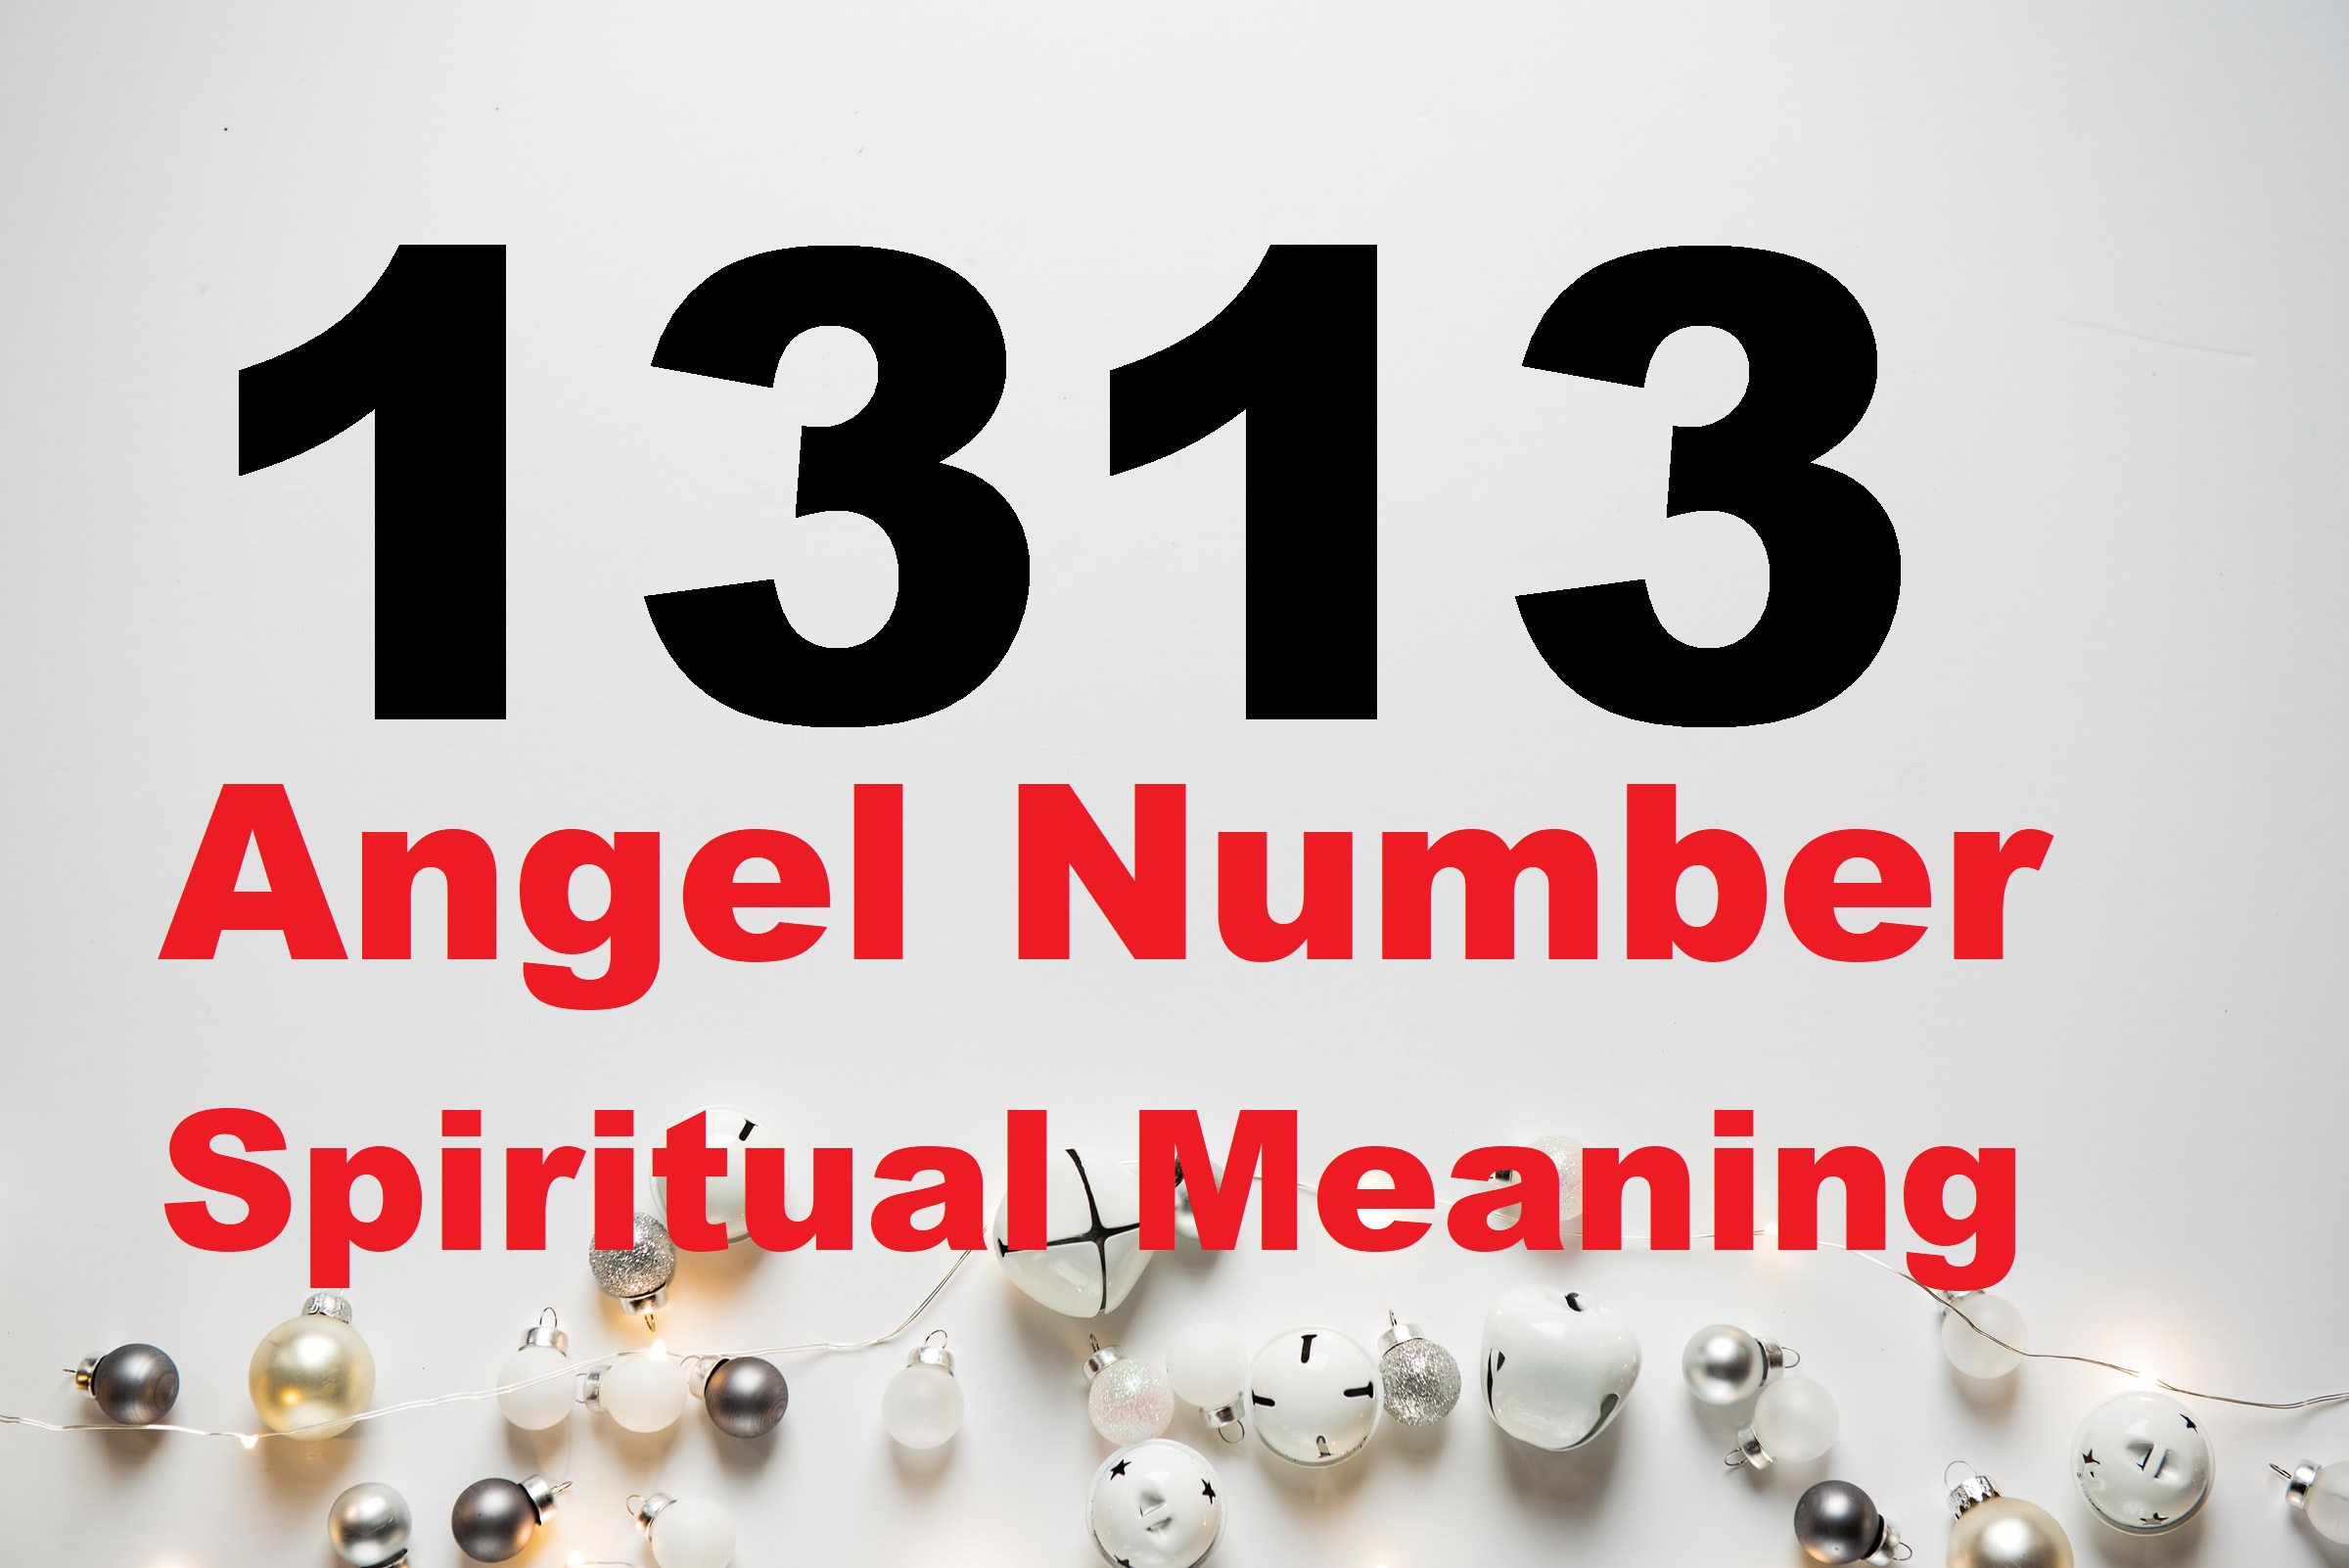 1313 Angel Number Spiritual Meaning text in black and red font color written on a white decorative background